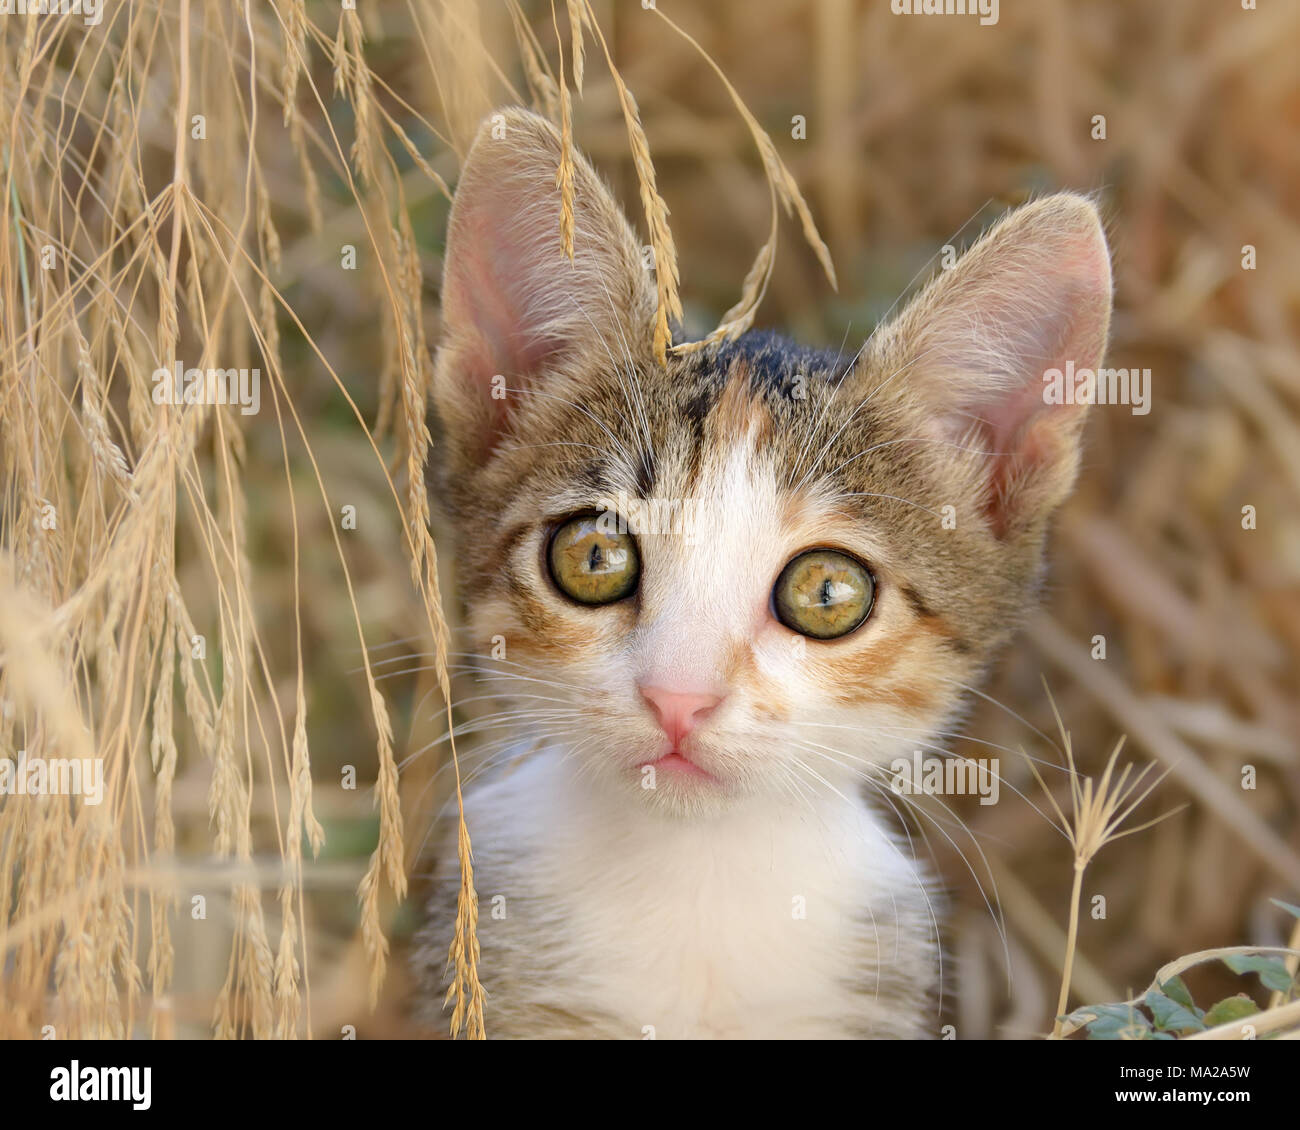 Cute nosy cat kitten, patched tabby and white fur, sitting among withered grass, a close-up portrait with beautiful big eyes, Greece, Europe Stock Photo